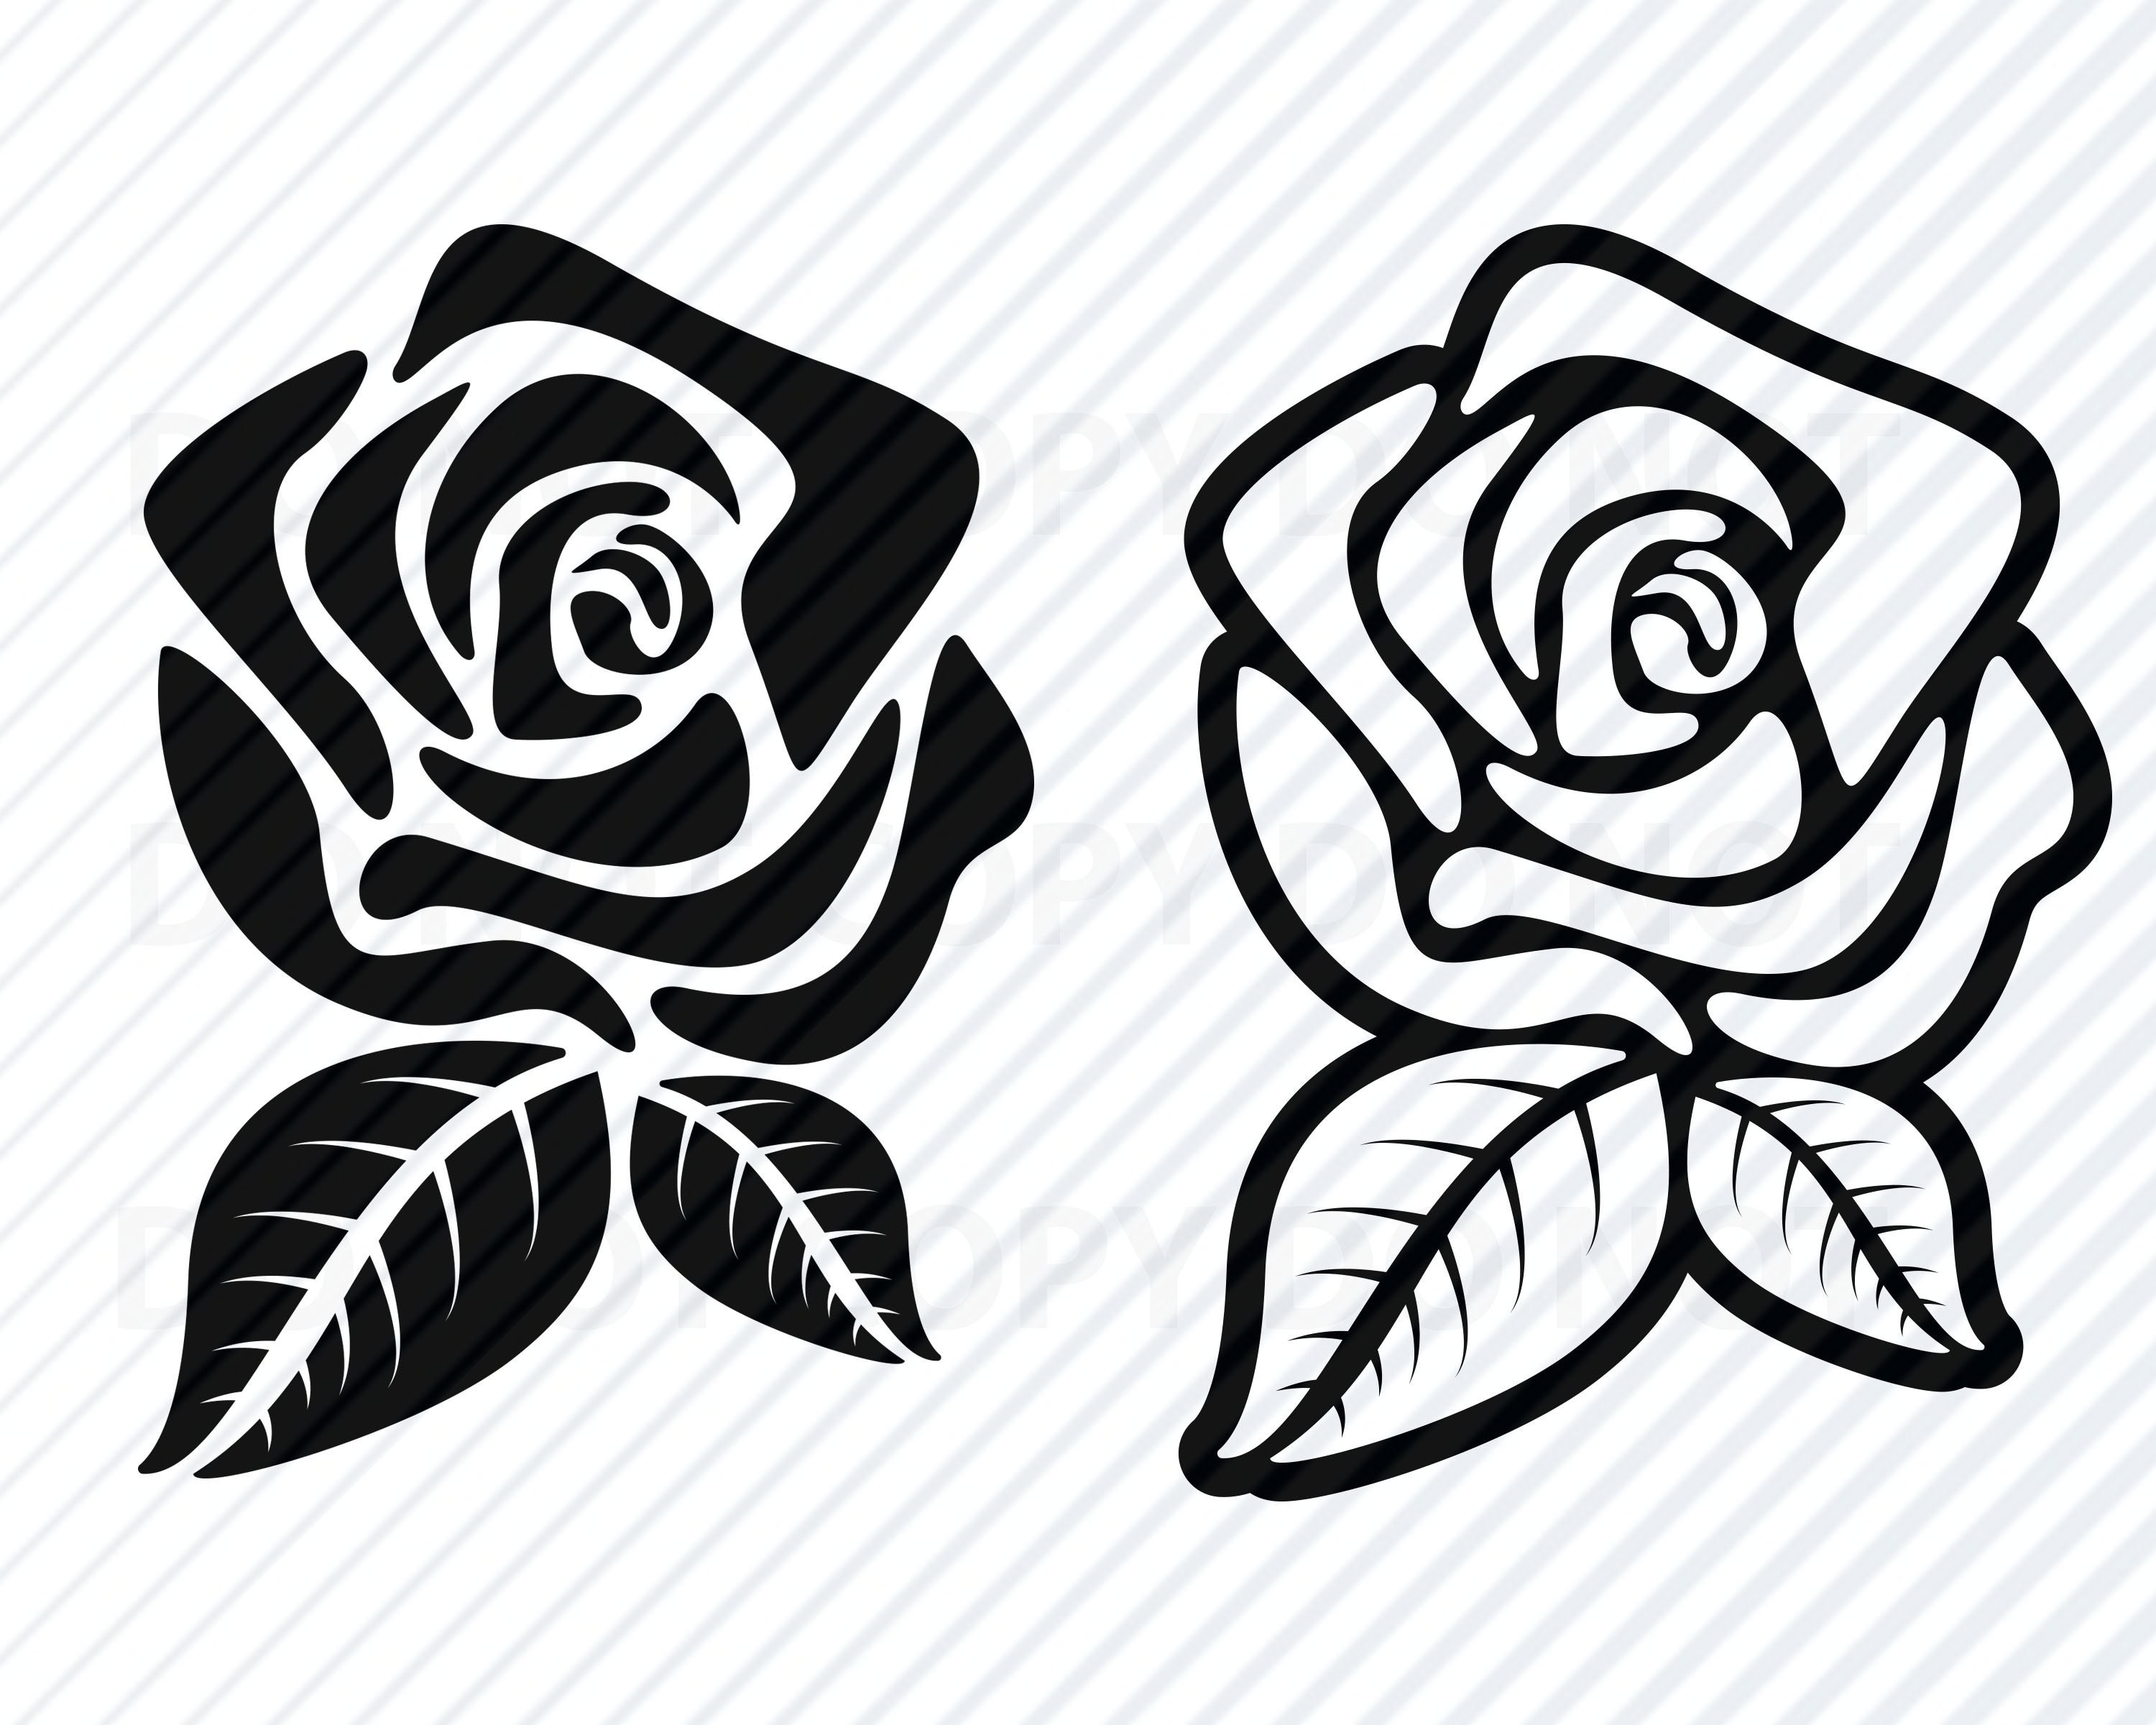 Free Rose Svg File For Cricut - 1887+ SVG File for Silhouette - Free